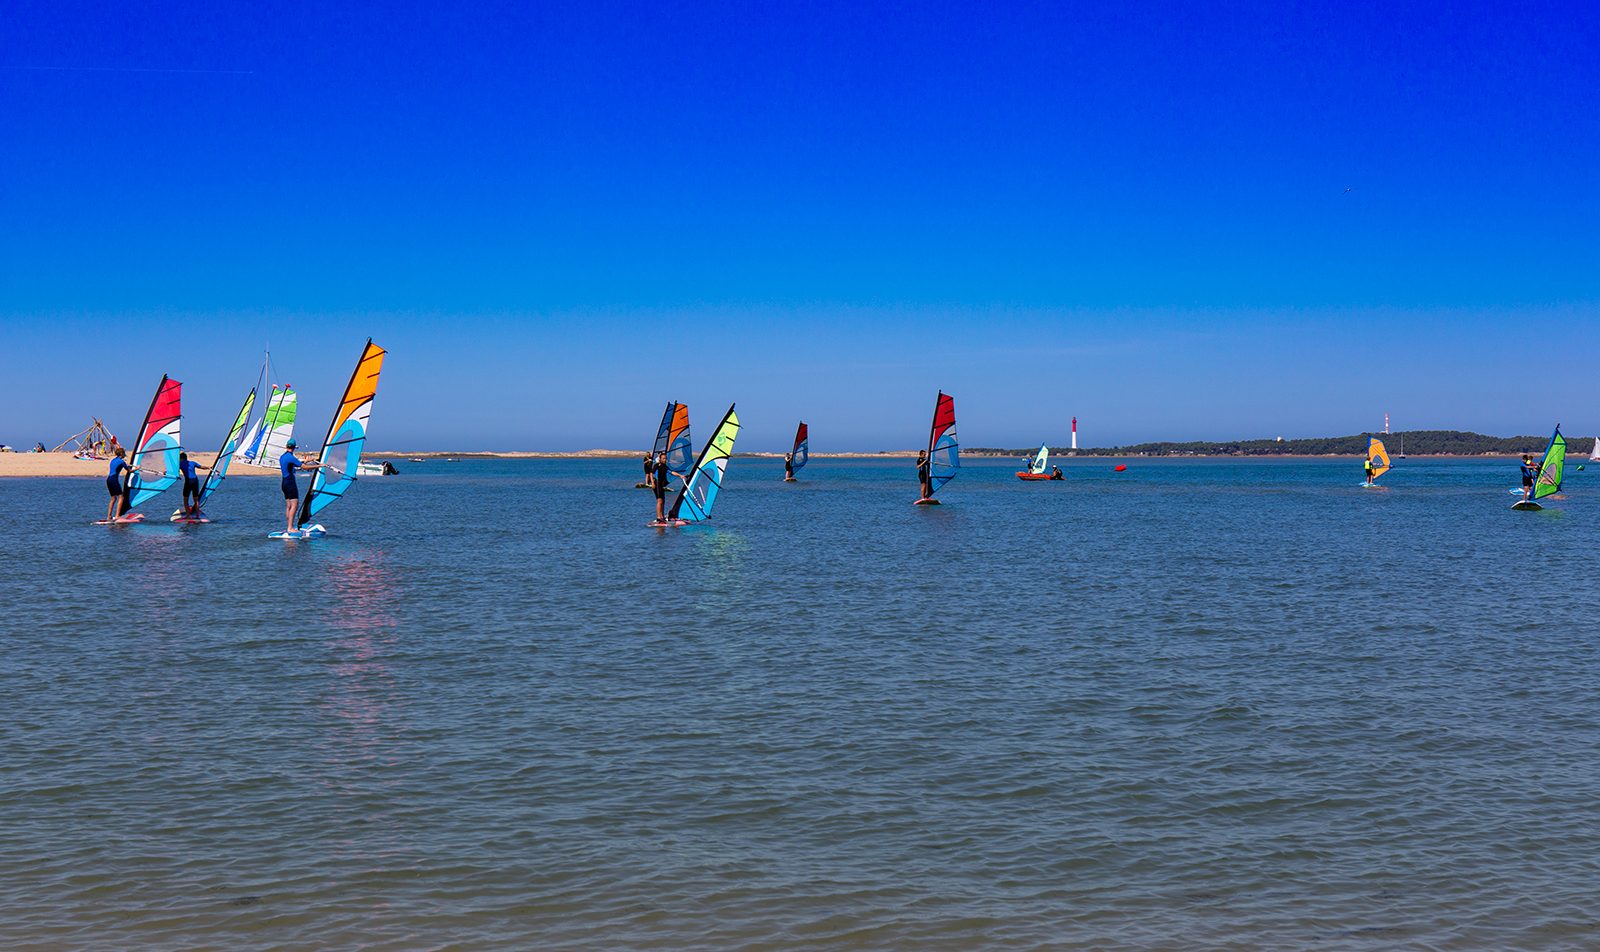 Water sports - Windsurfing on the bay of Bonne Anse